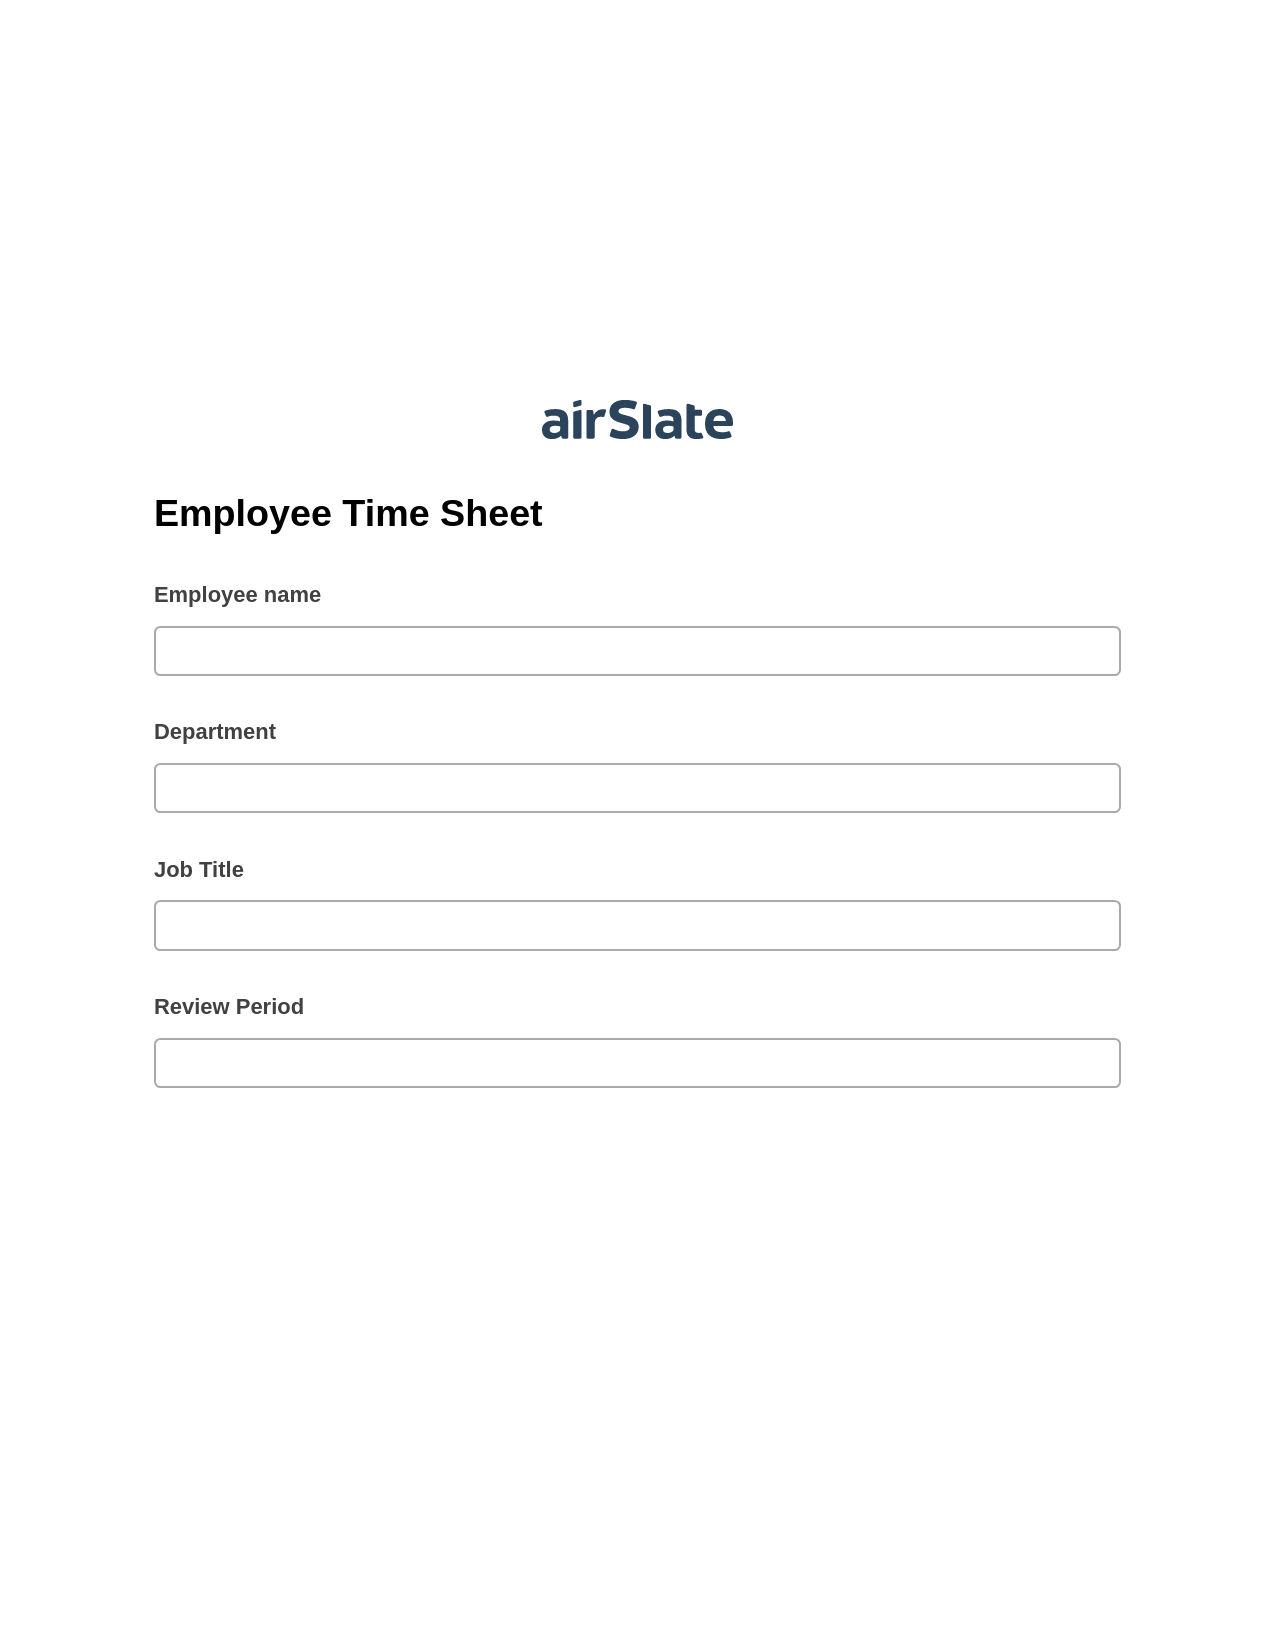 Employee Time Sheet Pre-fill from Salesforce Records with SOQL Bot, Jira Bot, Export to WebMerge Bot